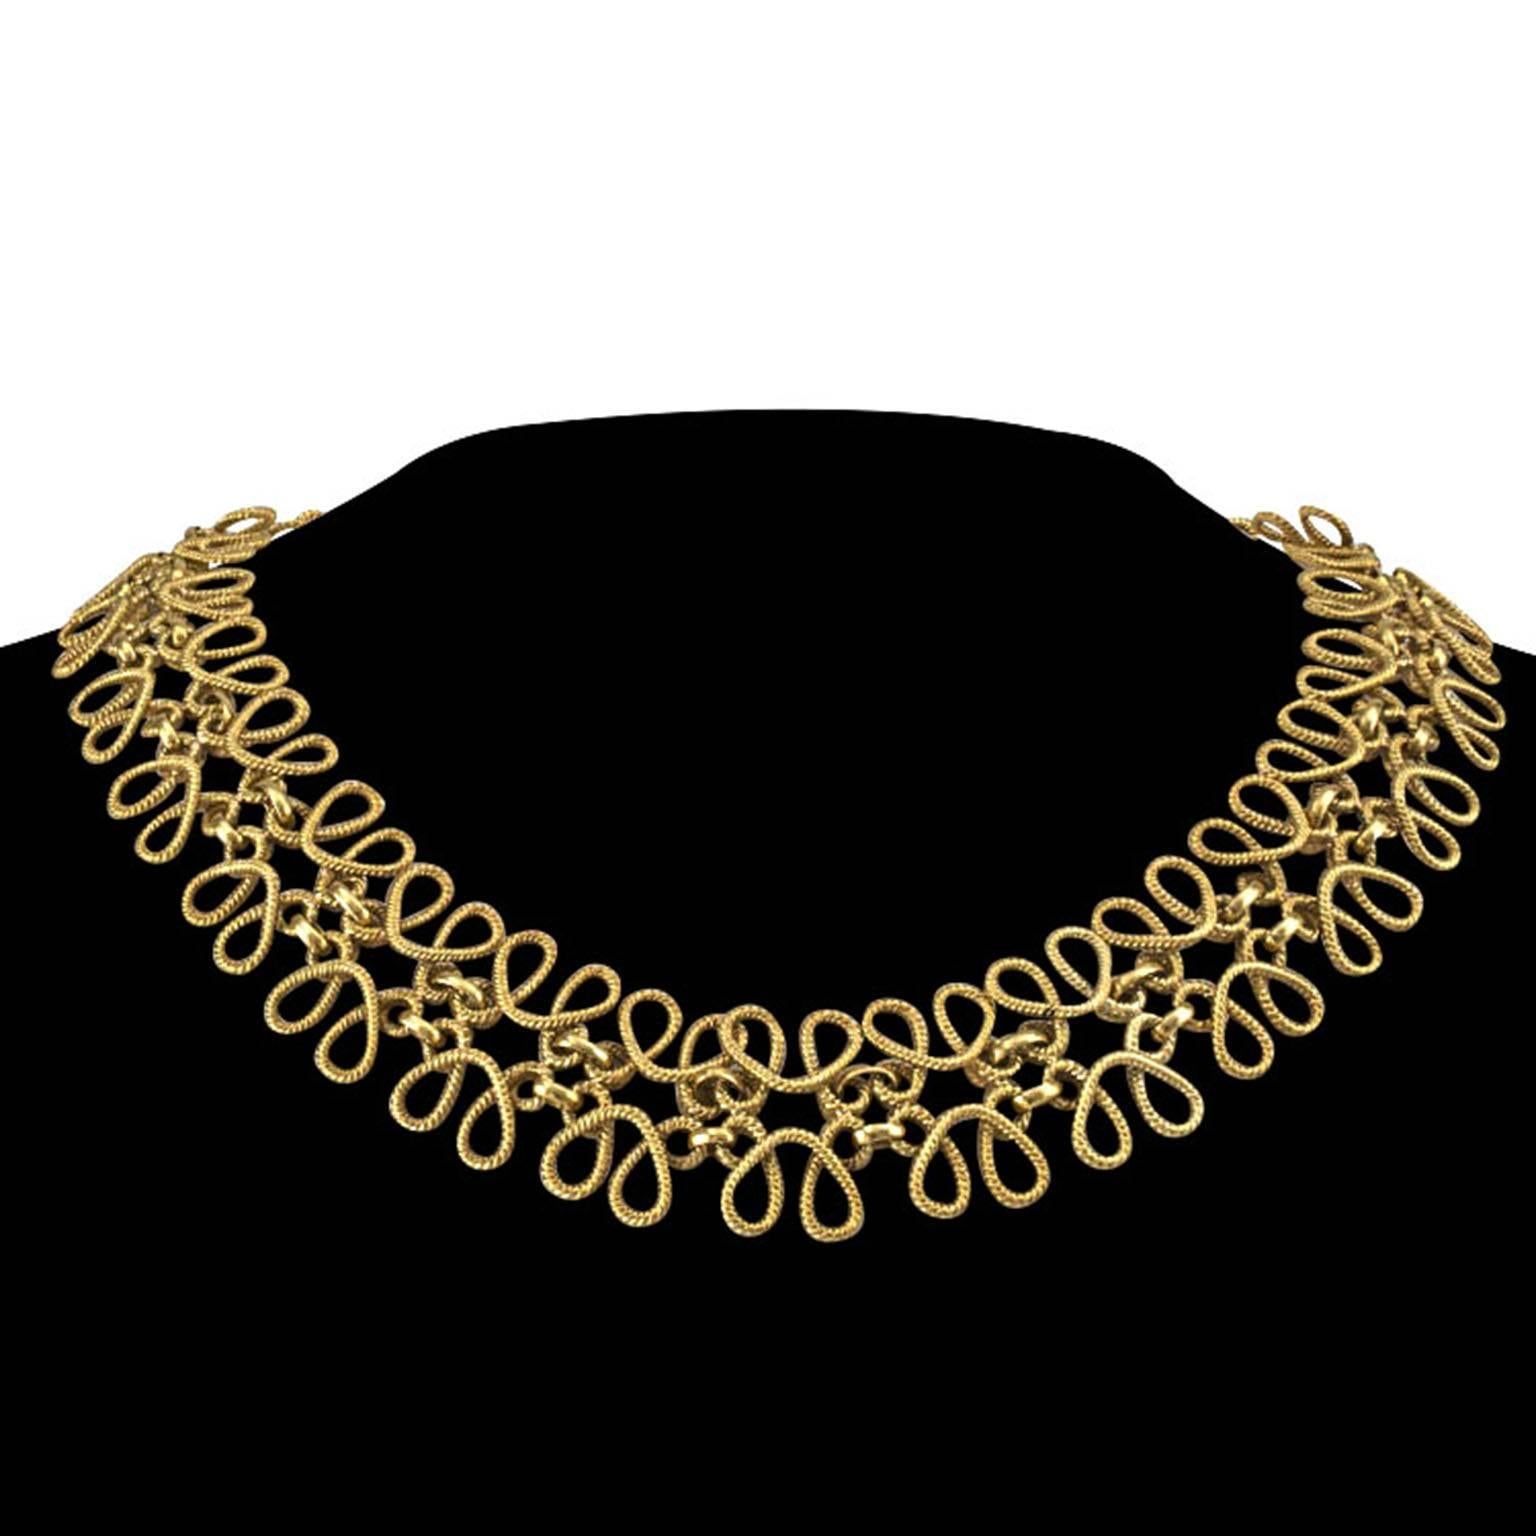 Handwoven 18 Karat Gold Necklace Circa 1960

Supple and lace like, the 7/8